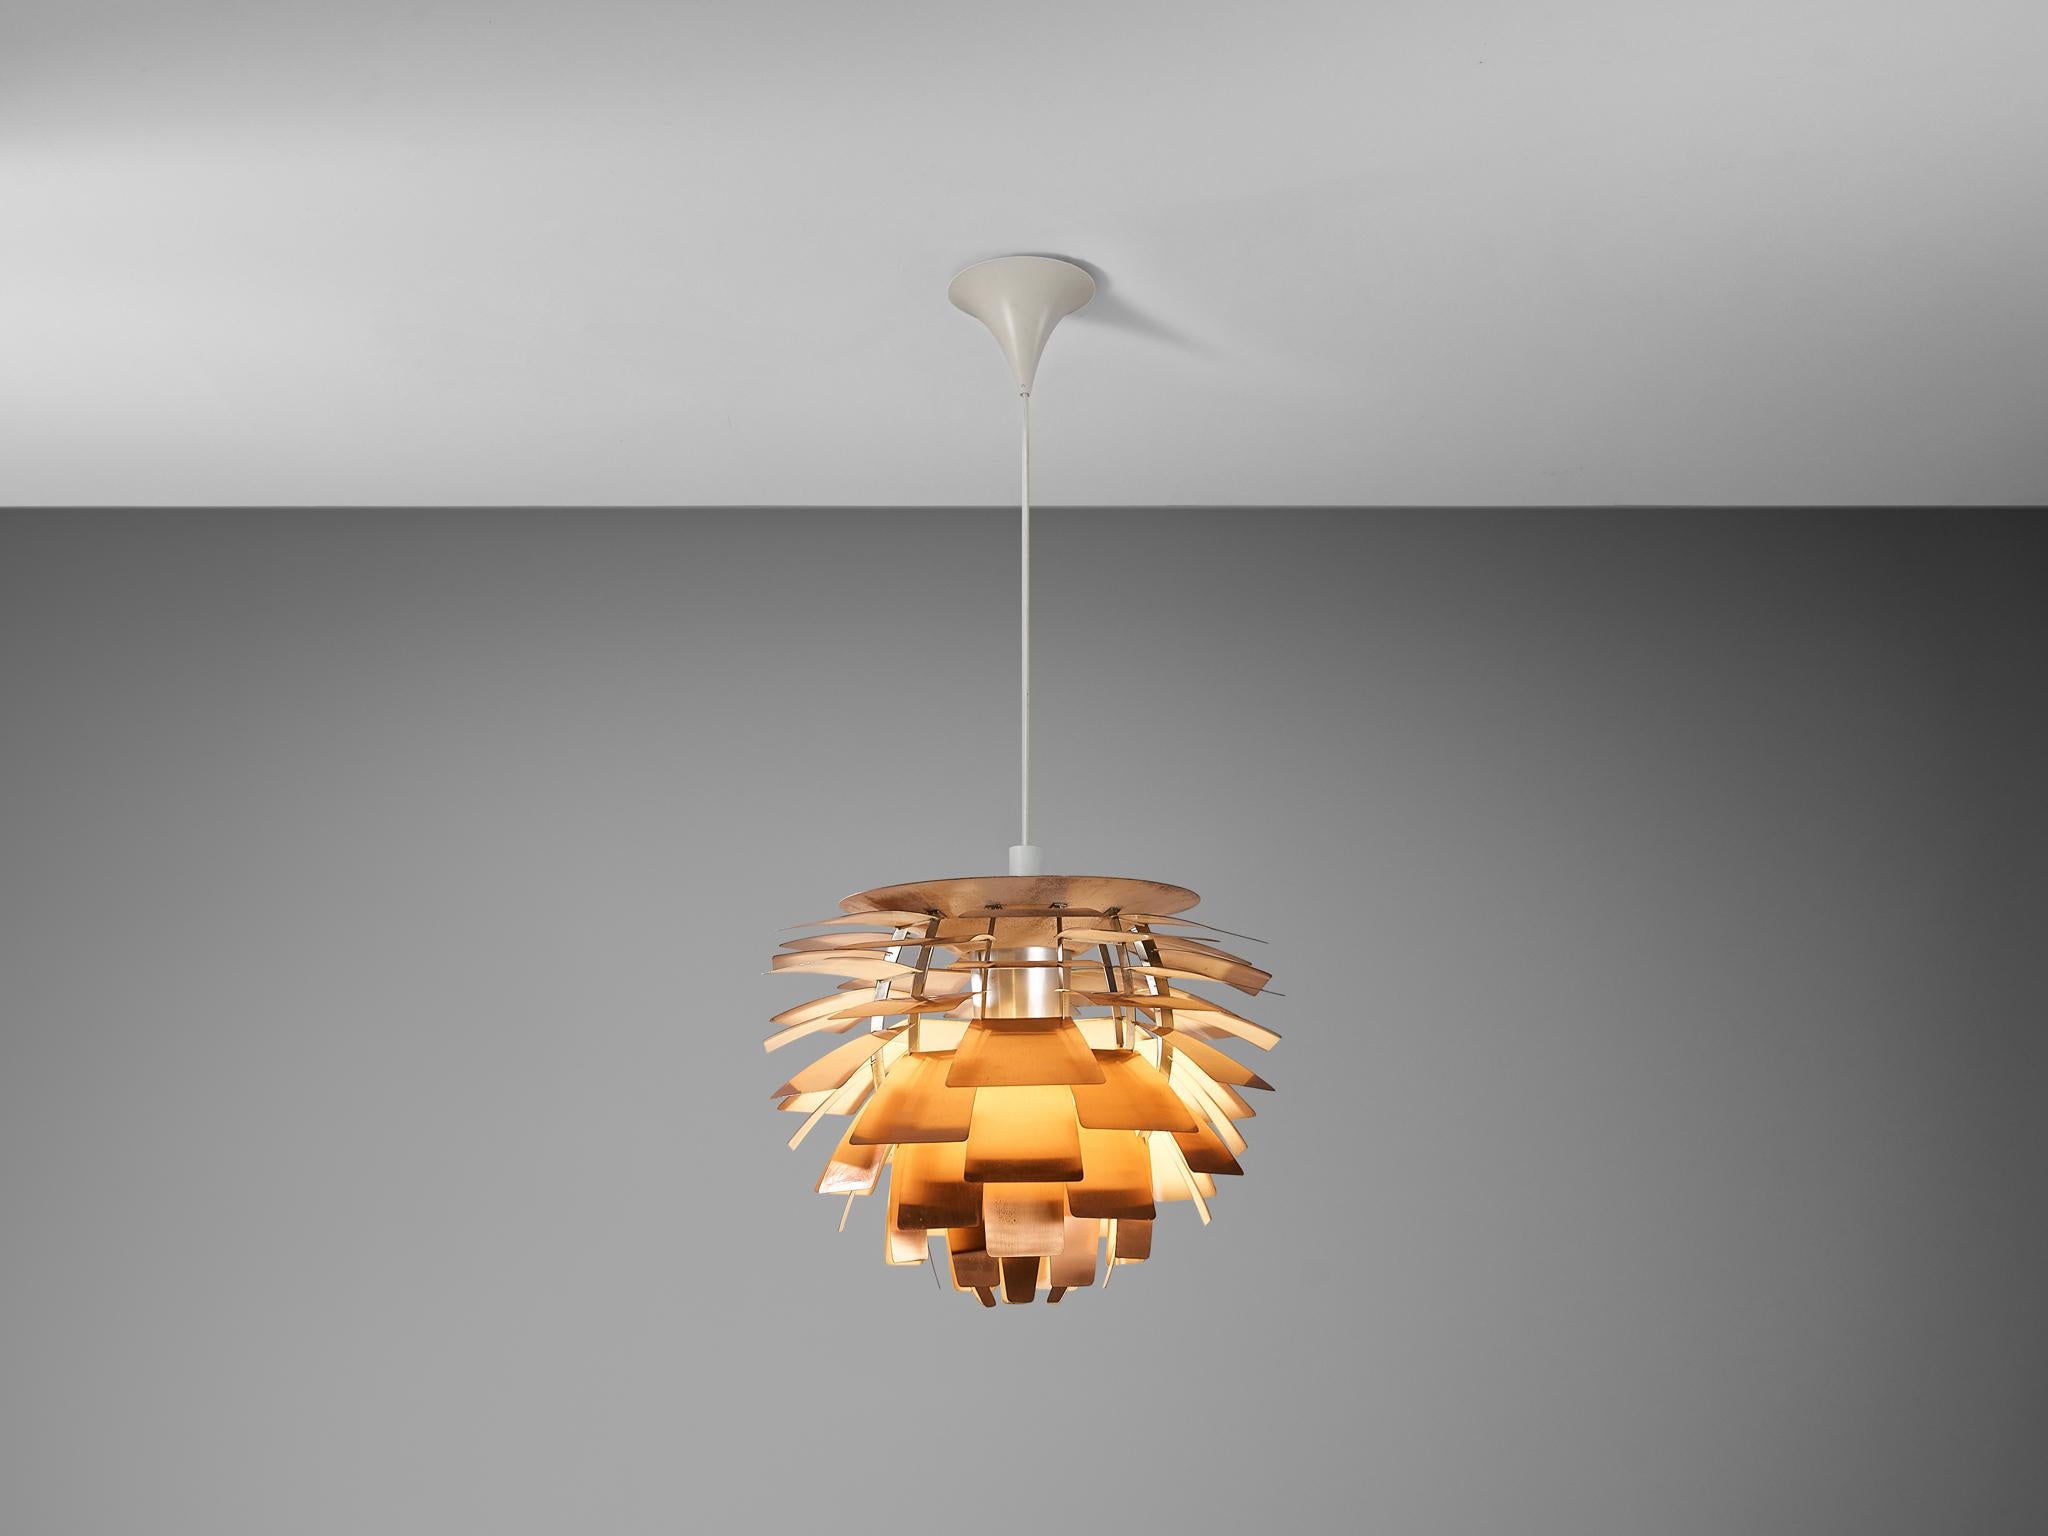 Poul Henningsen for Louis Poulsen, 'PH-Artichoke' pendant, patinated copper, design 1957, manufactured 1950s, Denmark. 

The 'Artichoke' pendant is an all time eyecatcher in the lighting design. This iconic pendant, designed by Poul Henningsen,